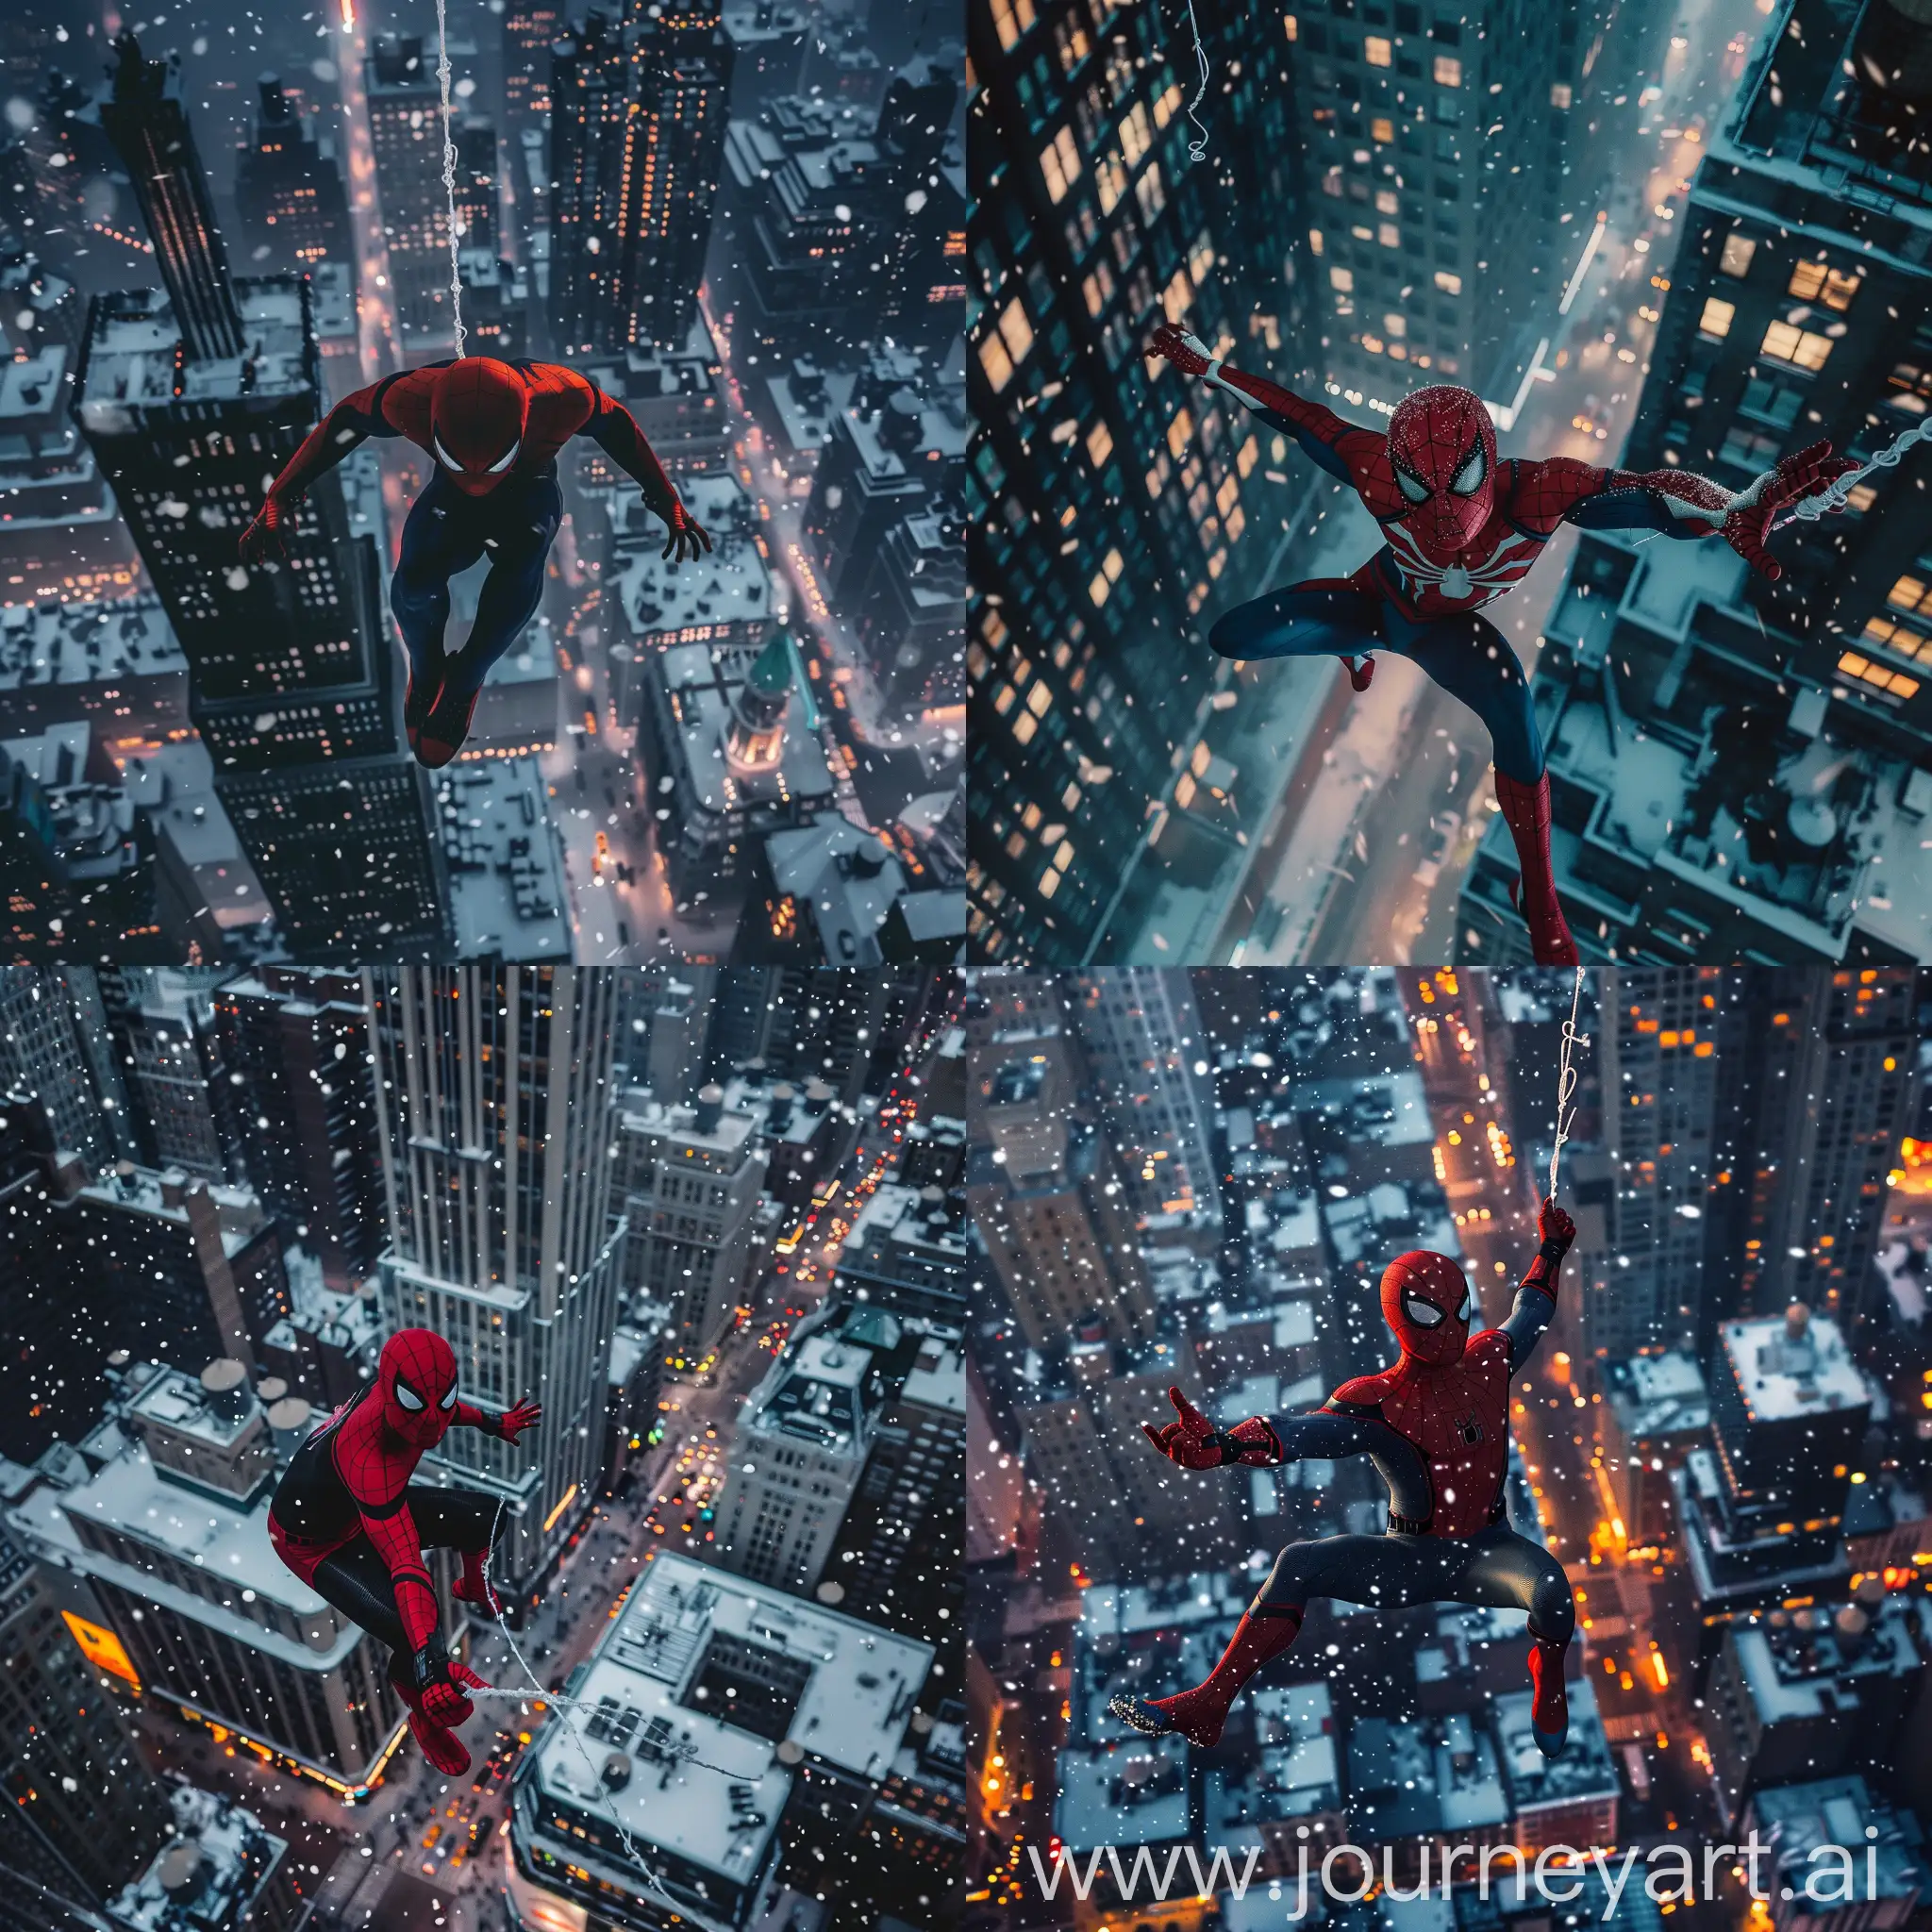 SpiderMan-Swinging-Through-Snowy-New-York-City-at-Night-in-Cinematic-4K-Arial-View